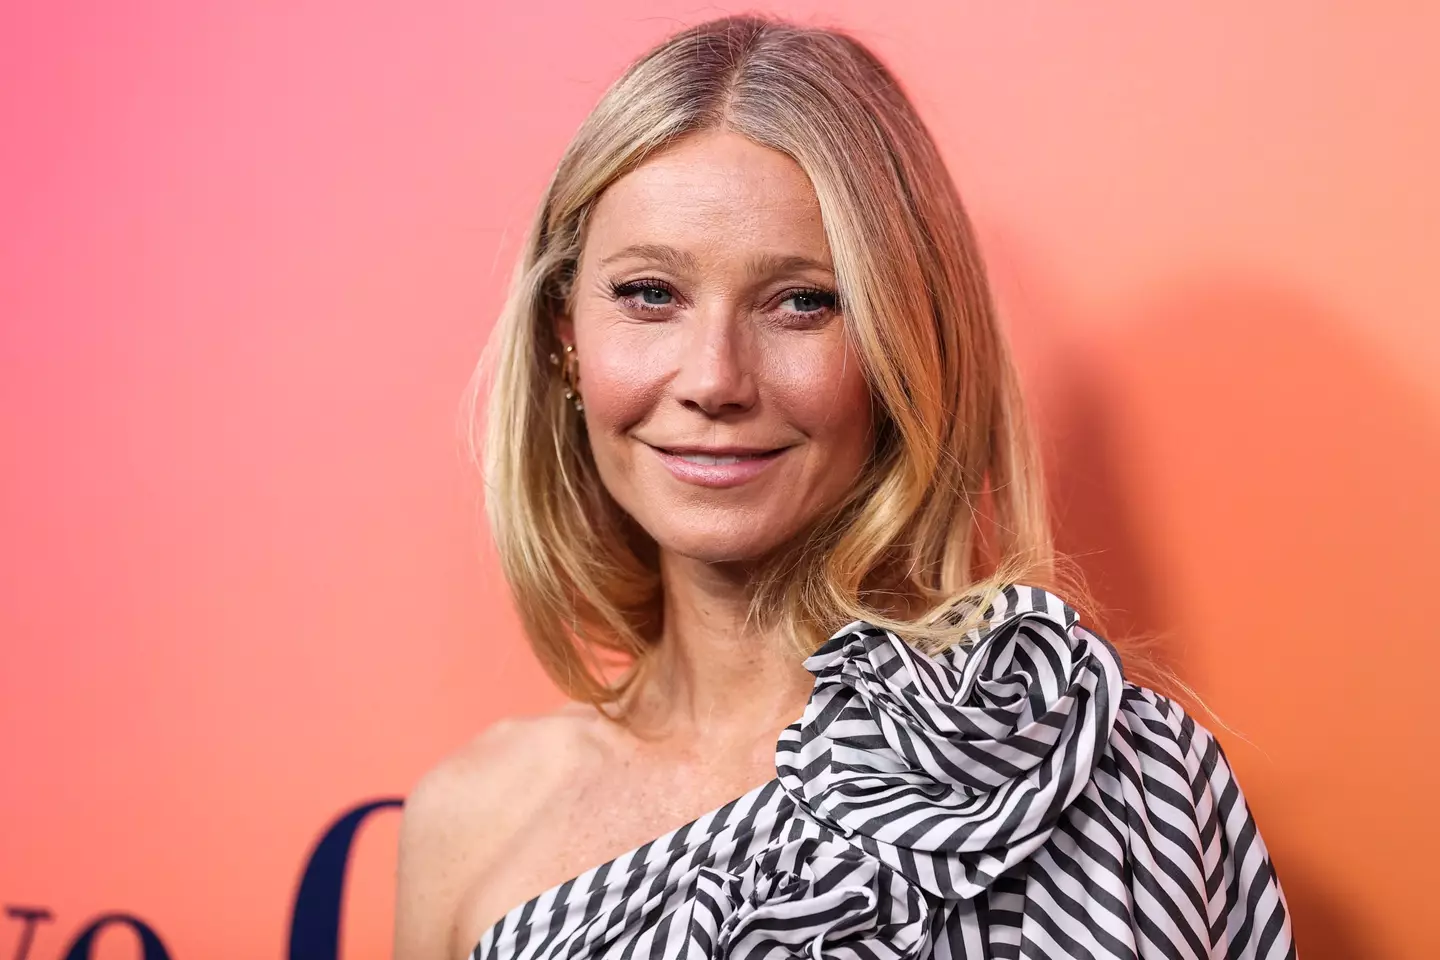 Gwyneth likes to make 'little incremental changes' instead.